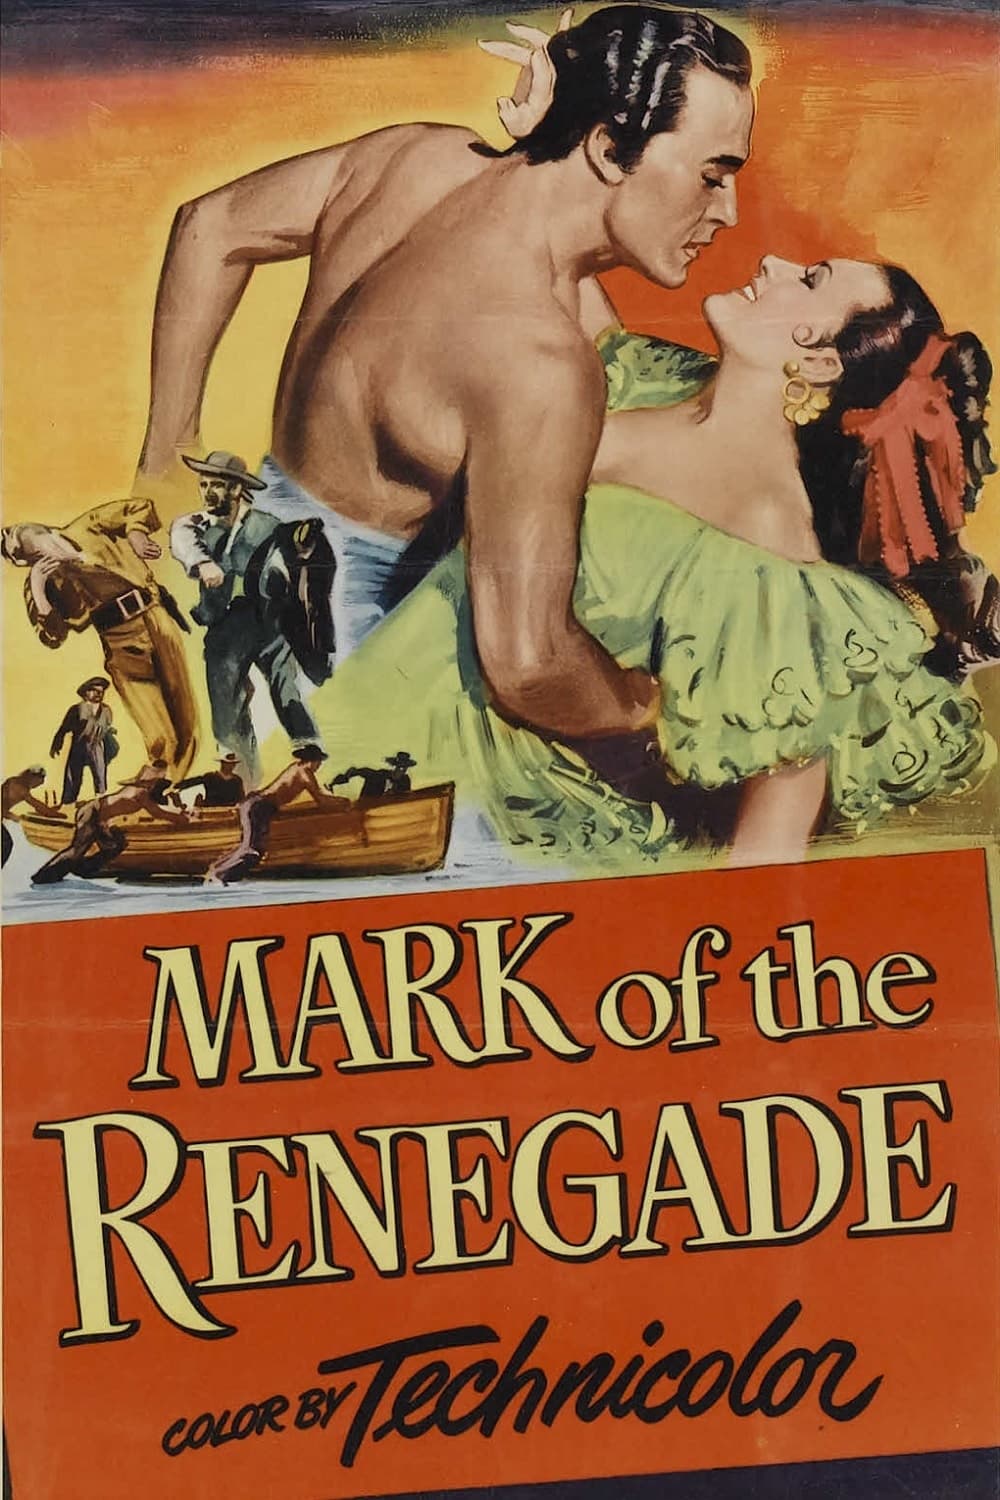 The Mark of the Renegade (1951)